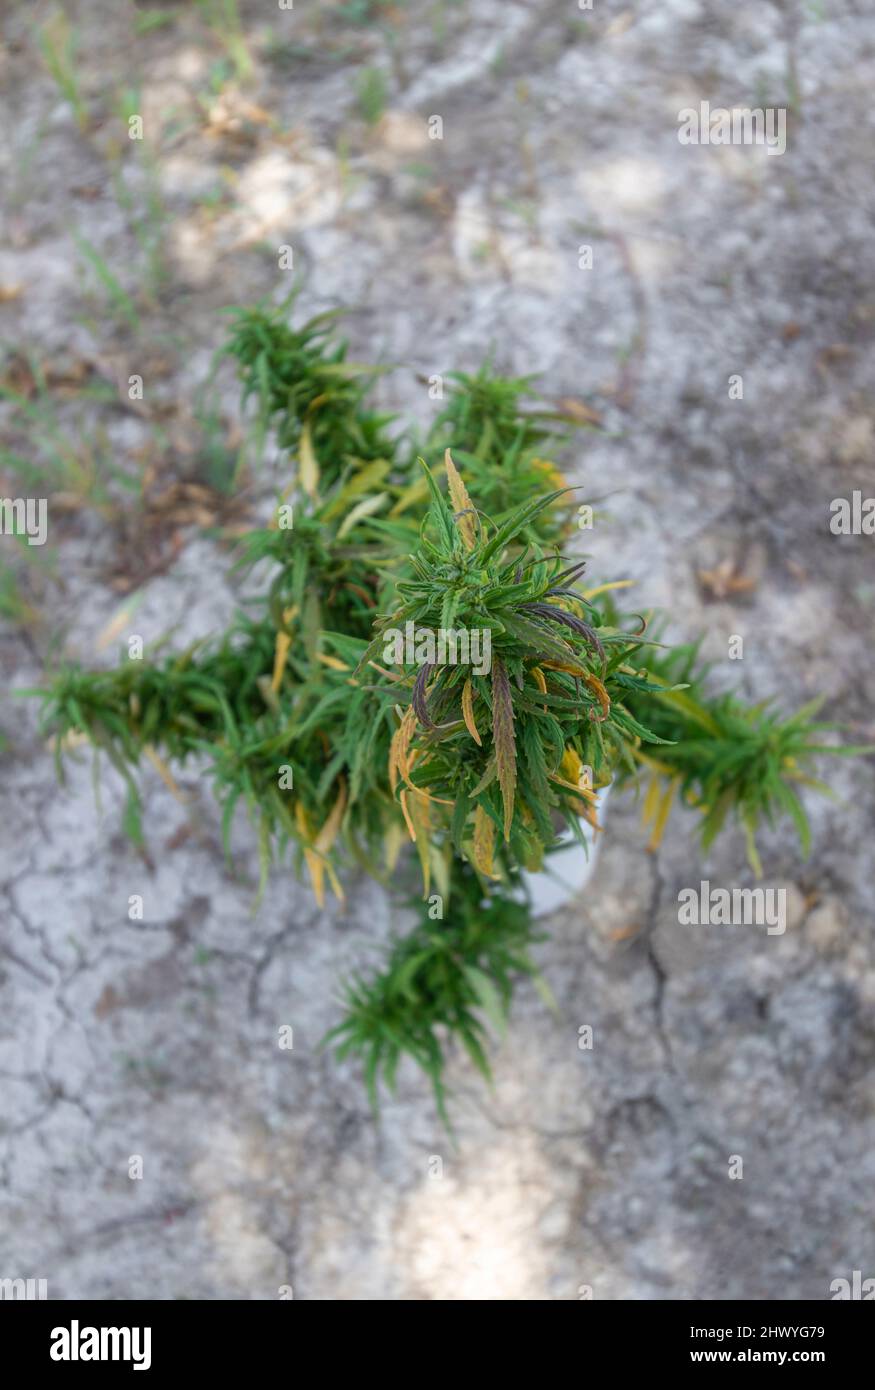 The top of an adult cannabis plant in a pot stands on the ground. View from above. Medium angle in focus Stock Photo